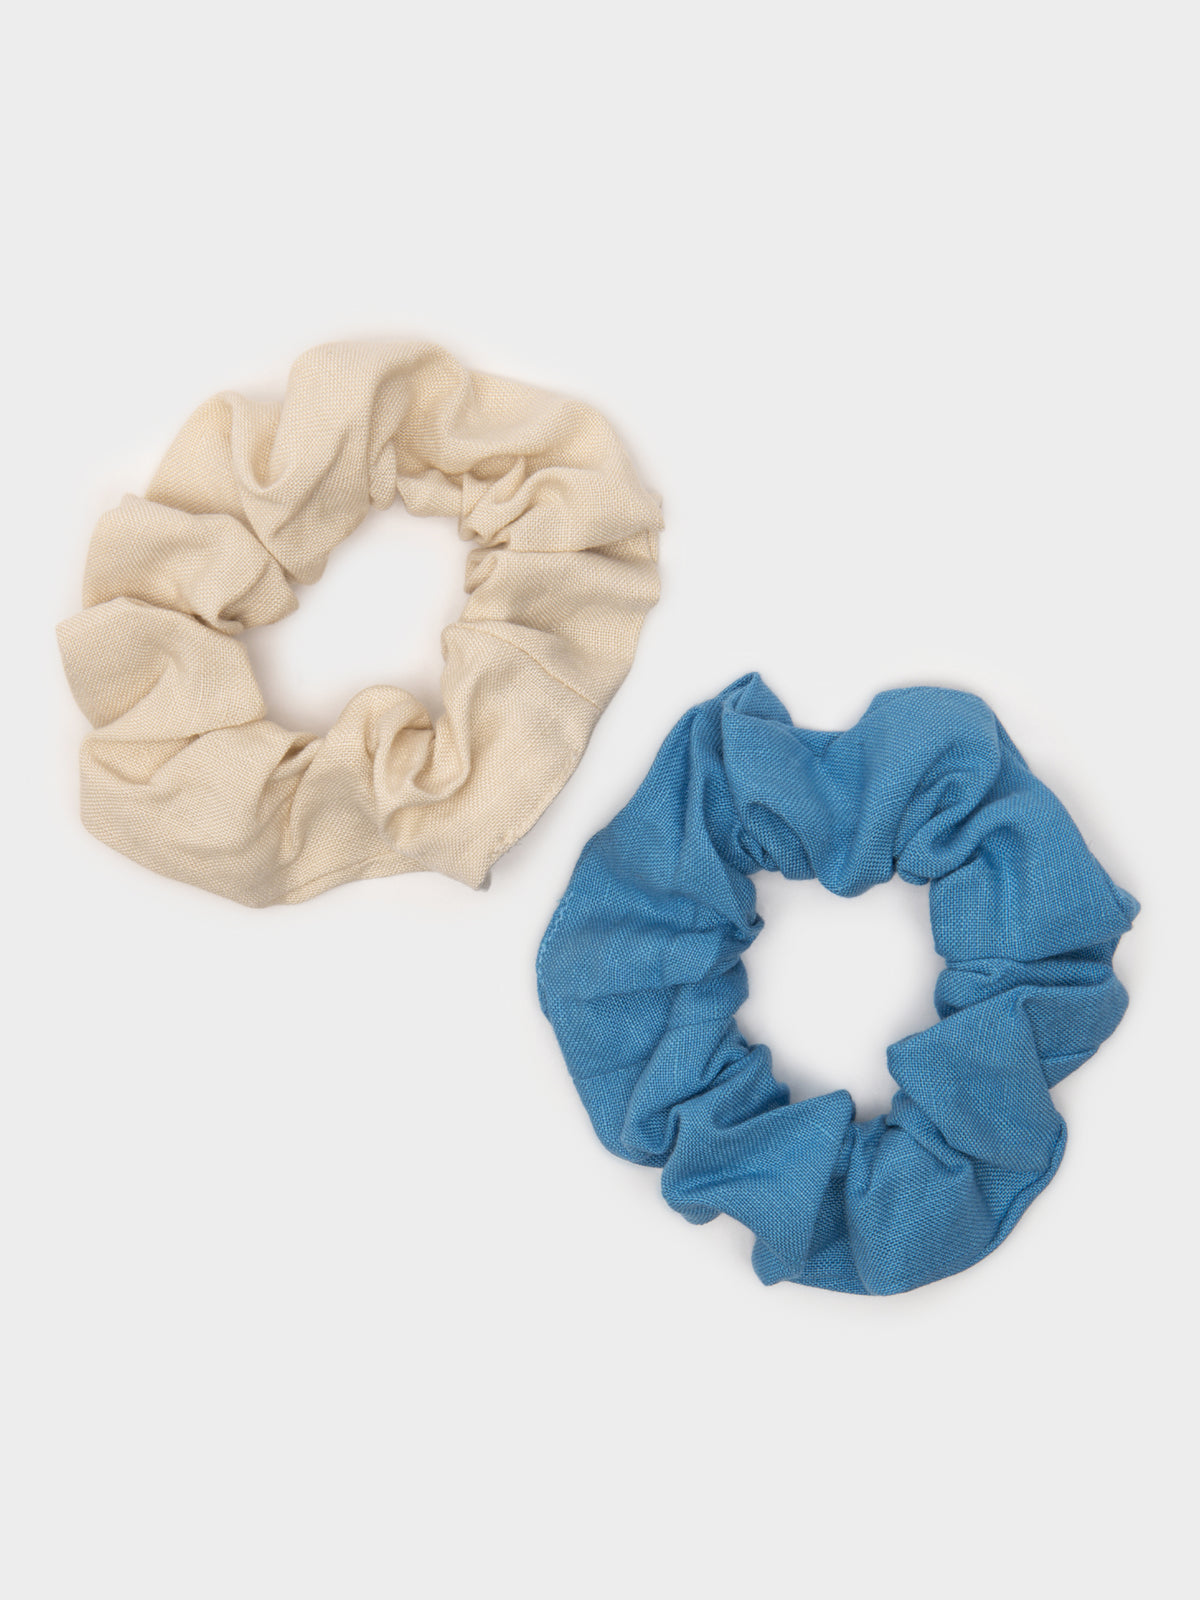 2 Pack Scrunchies in Azure and Cream